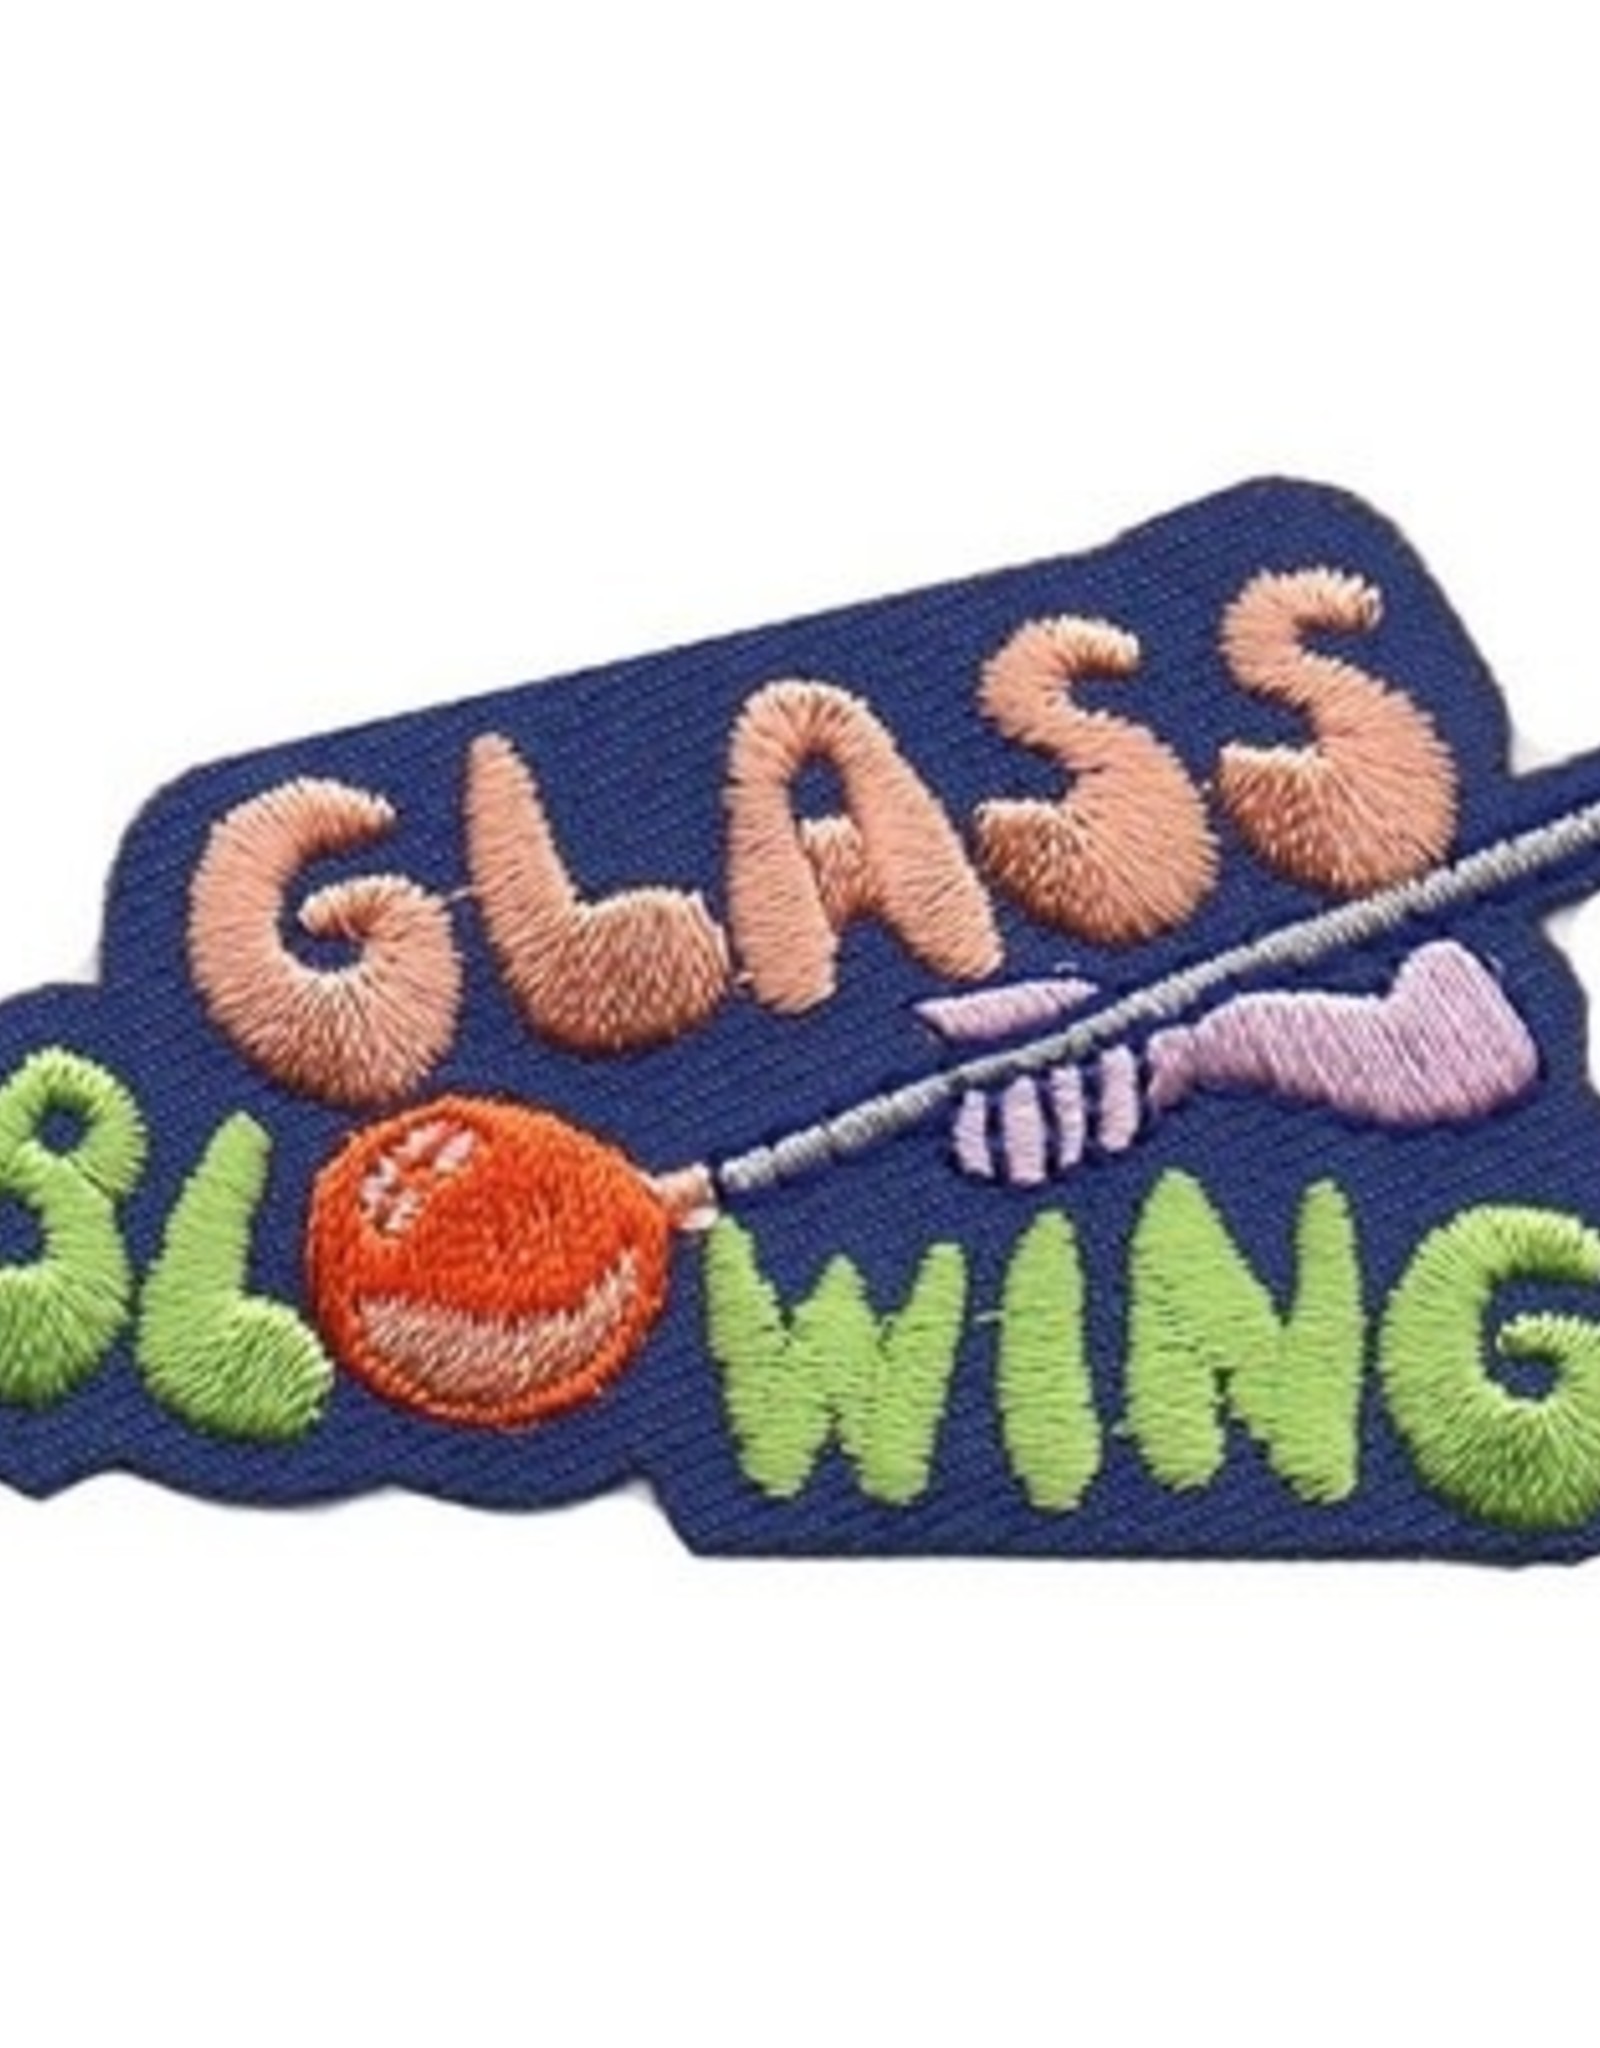 Glass Blowing Patch